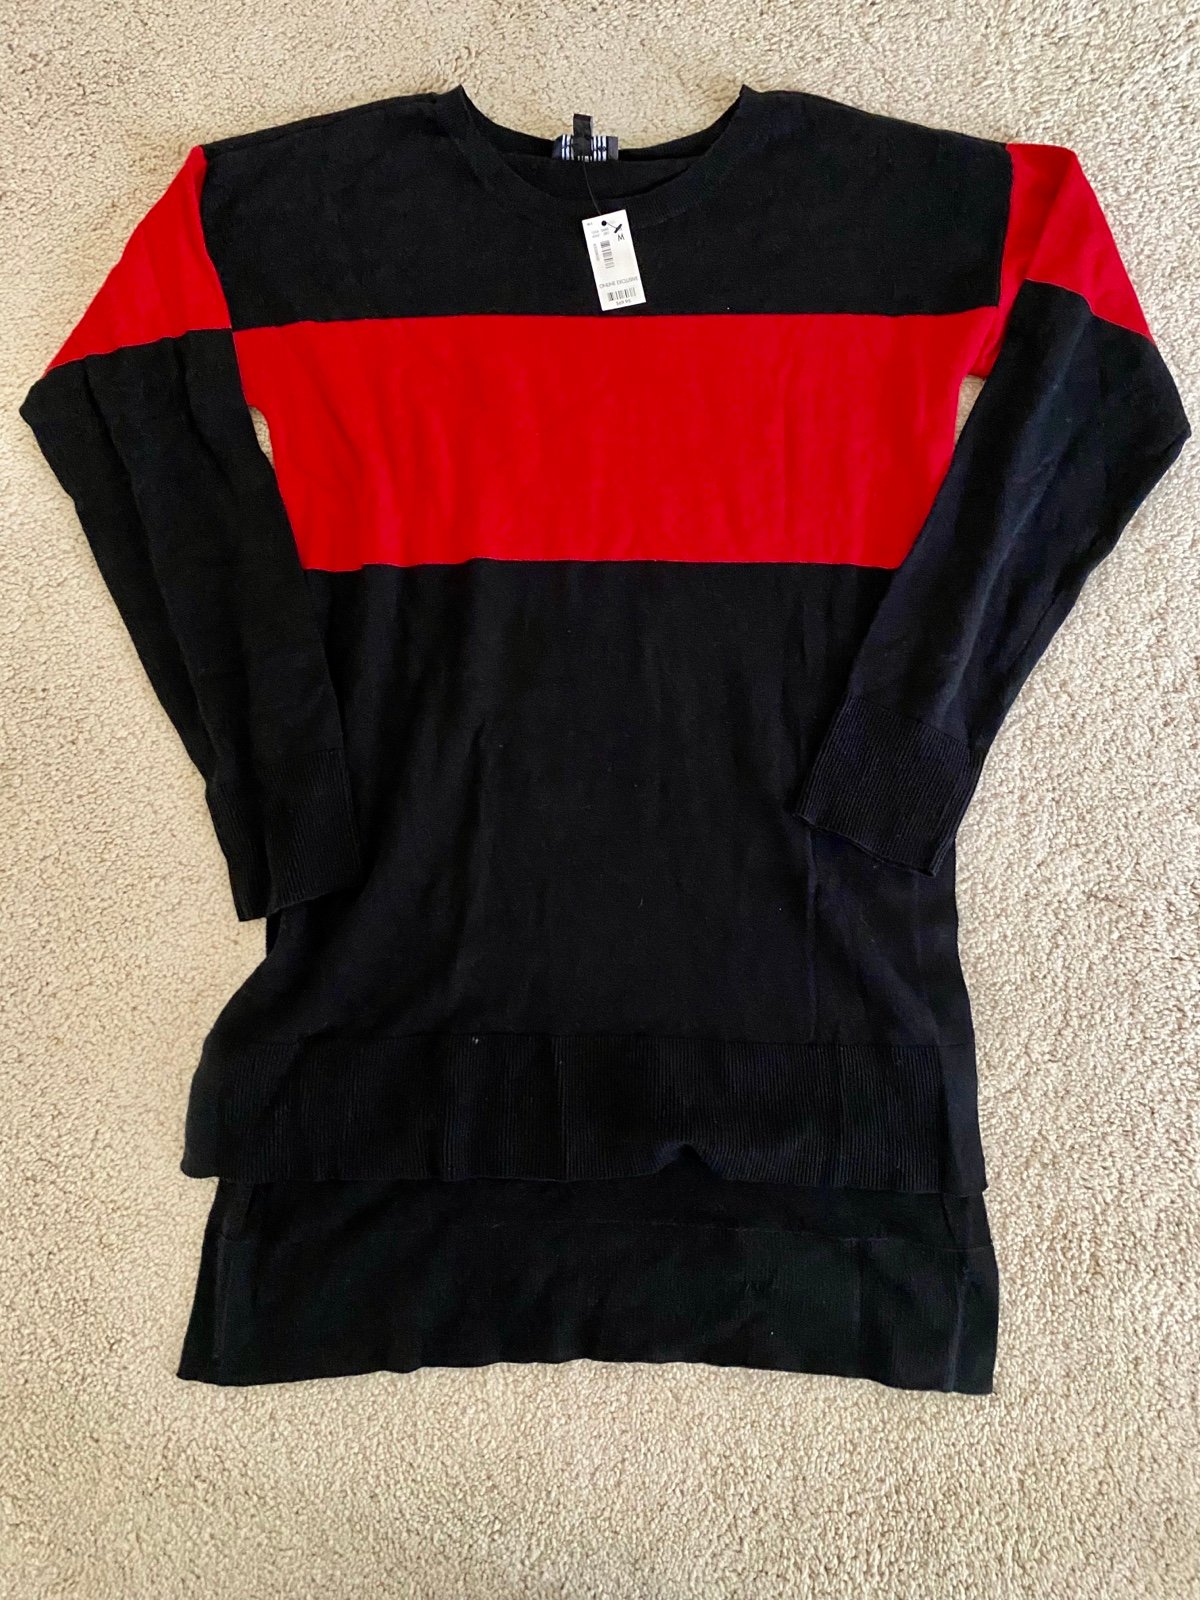 large selection NWT The Limited red & black sweater siz